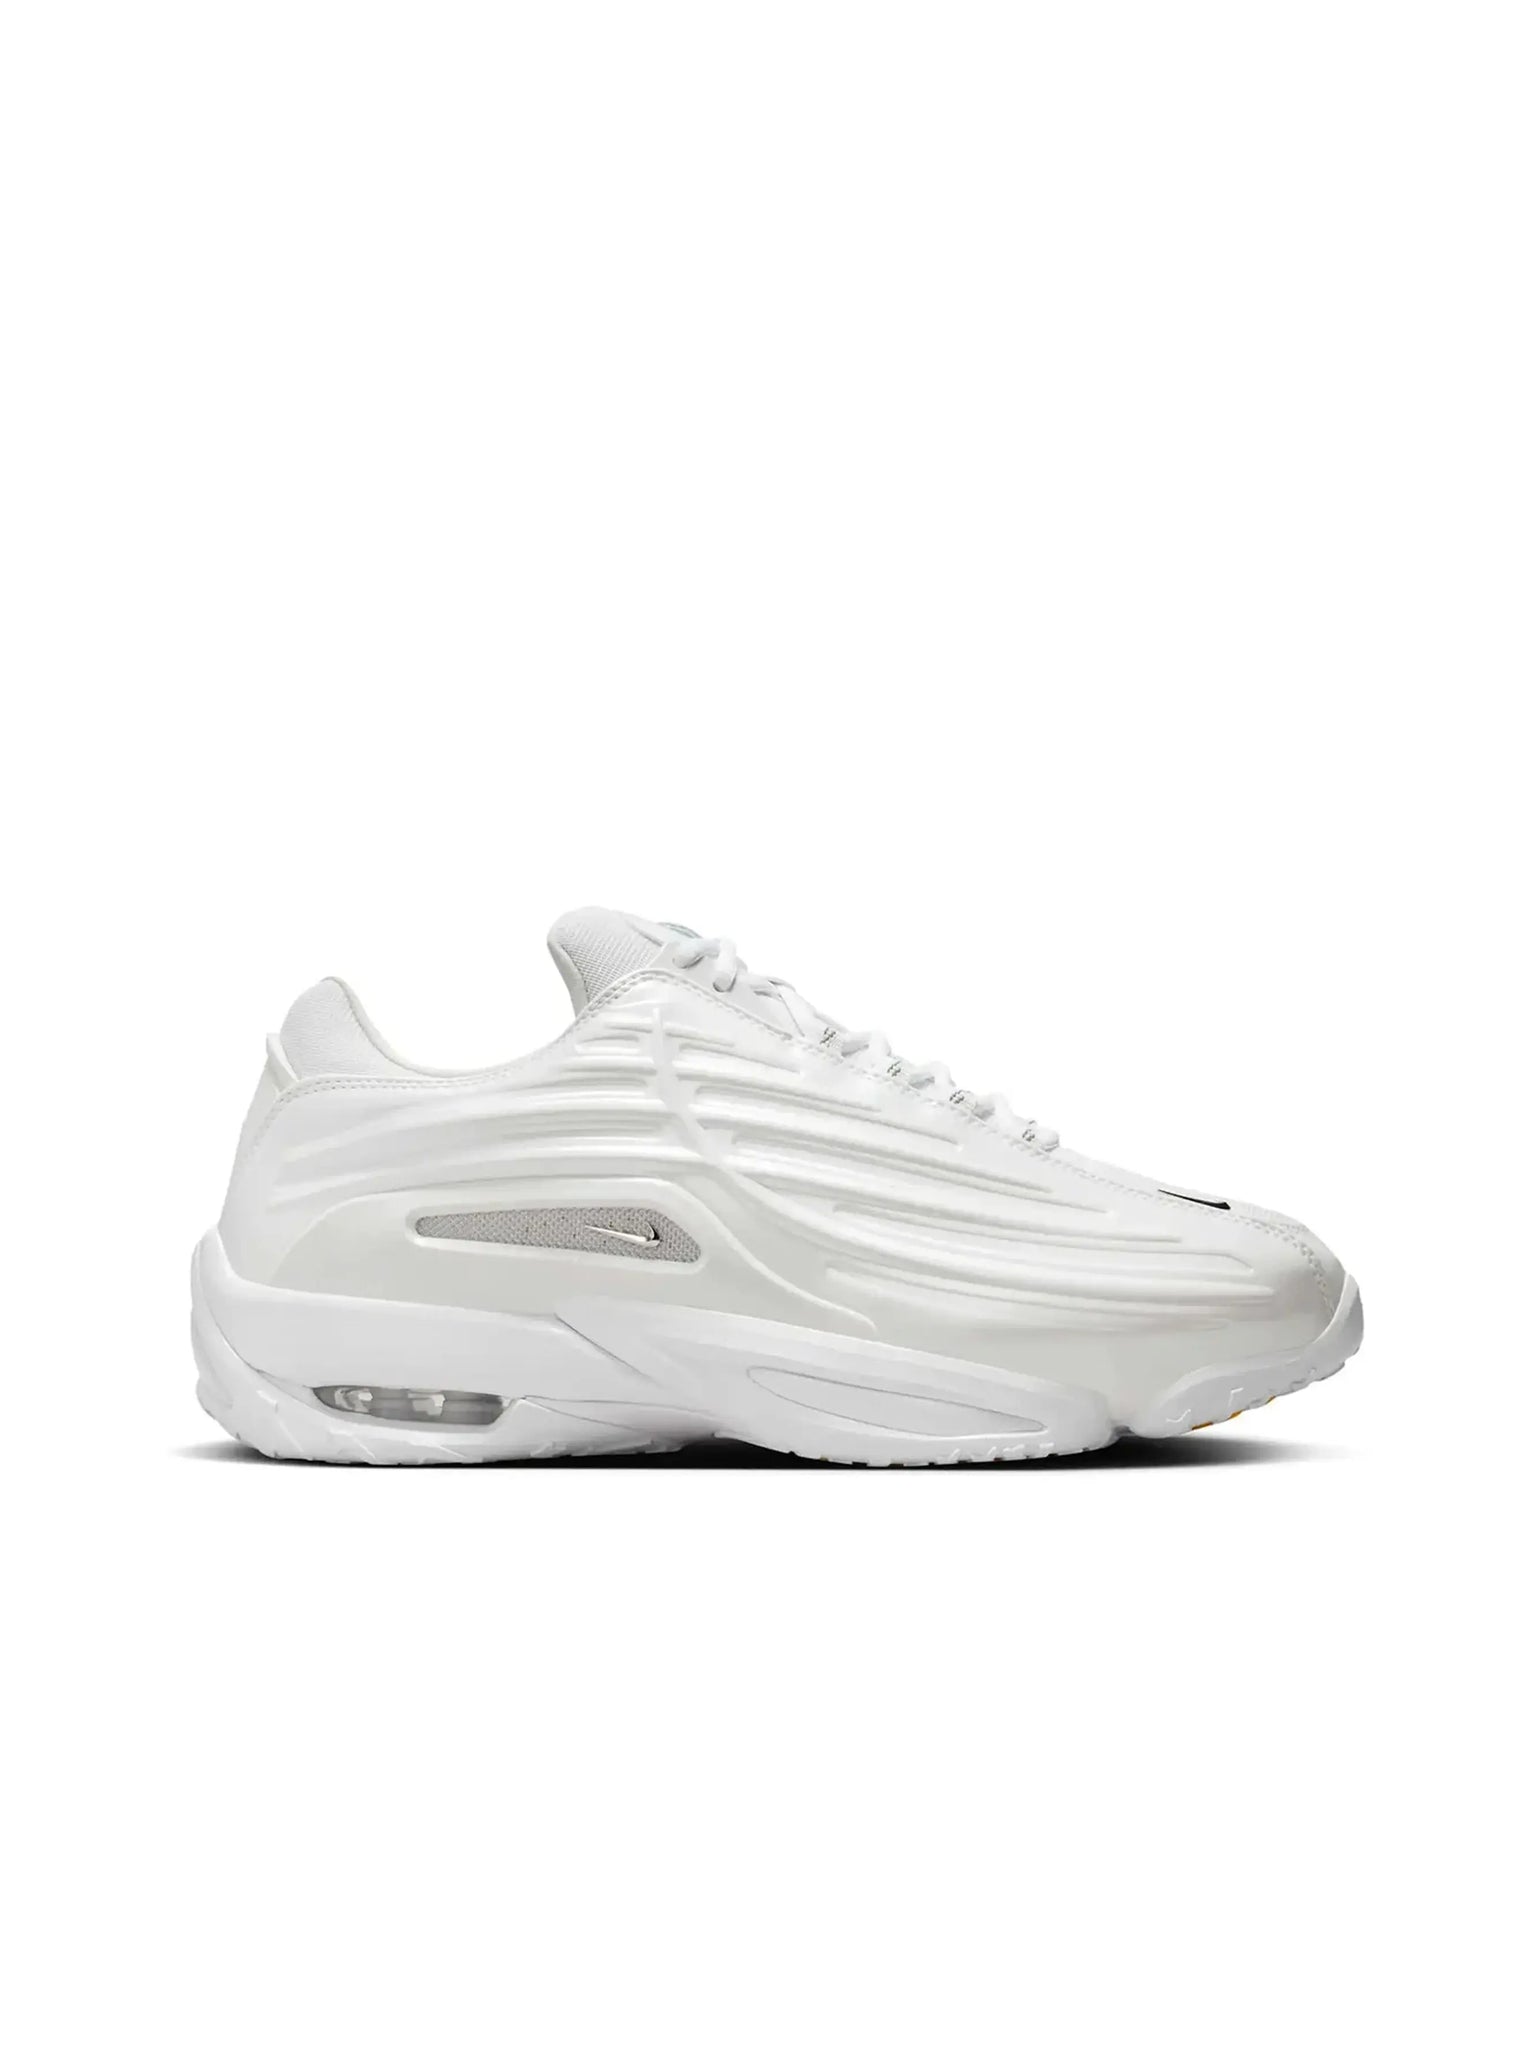 Nike Hot Step 2 Drake NOCTA White in Auckland, New Zealand - Shop name